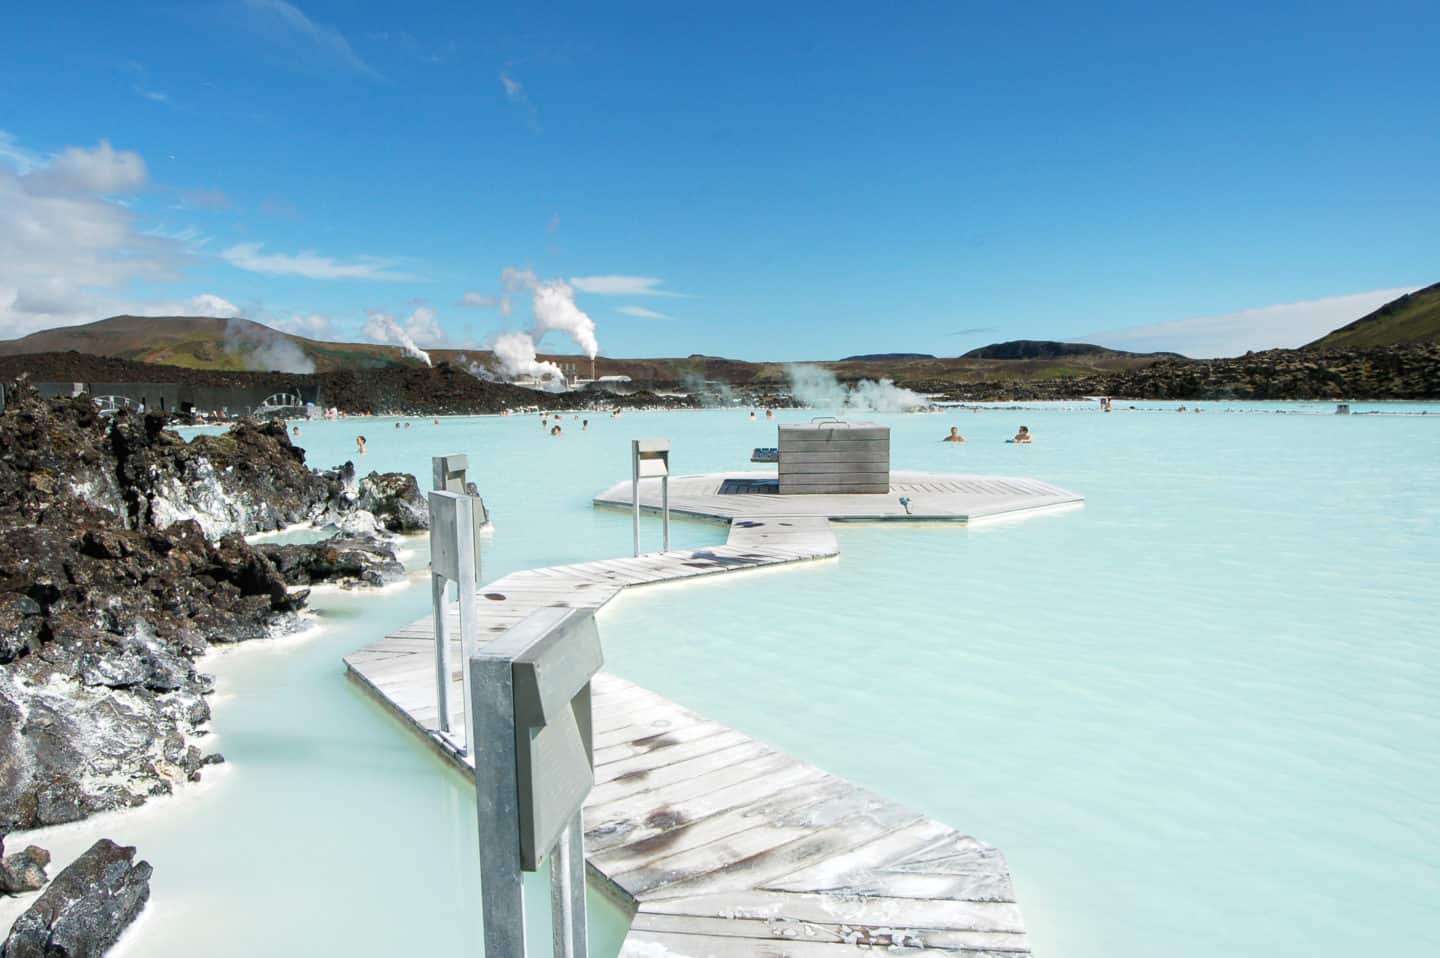 Visiting The Blue Lagoon In Iceland + Tips - Blue Lagoon Location, Admission fee and how to get there! #itsallbee #traveltips #adventure #spas #hotspring